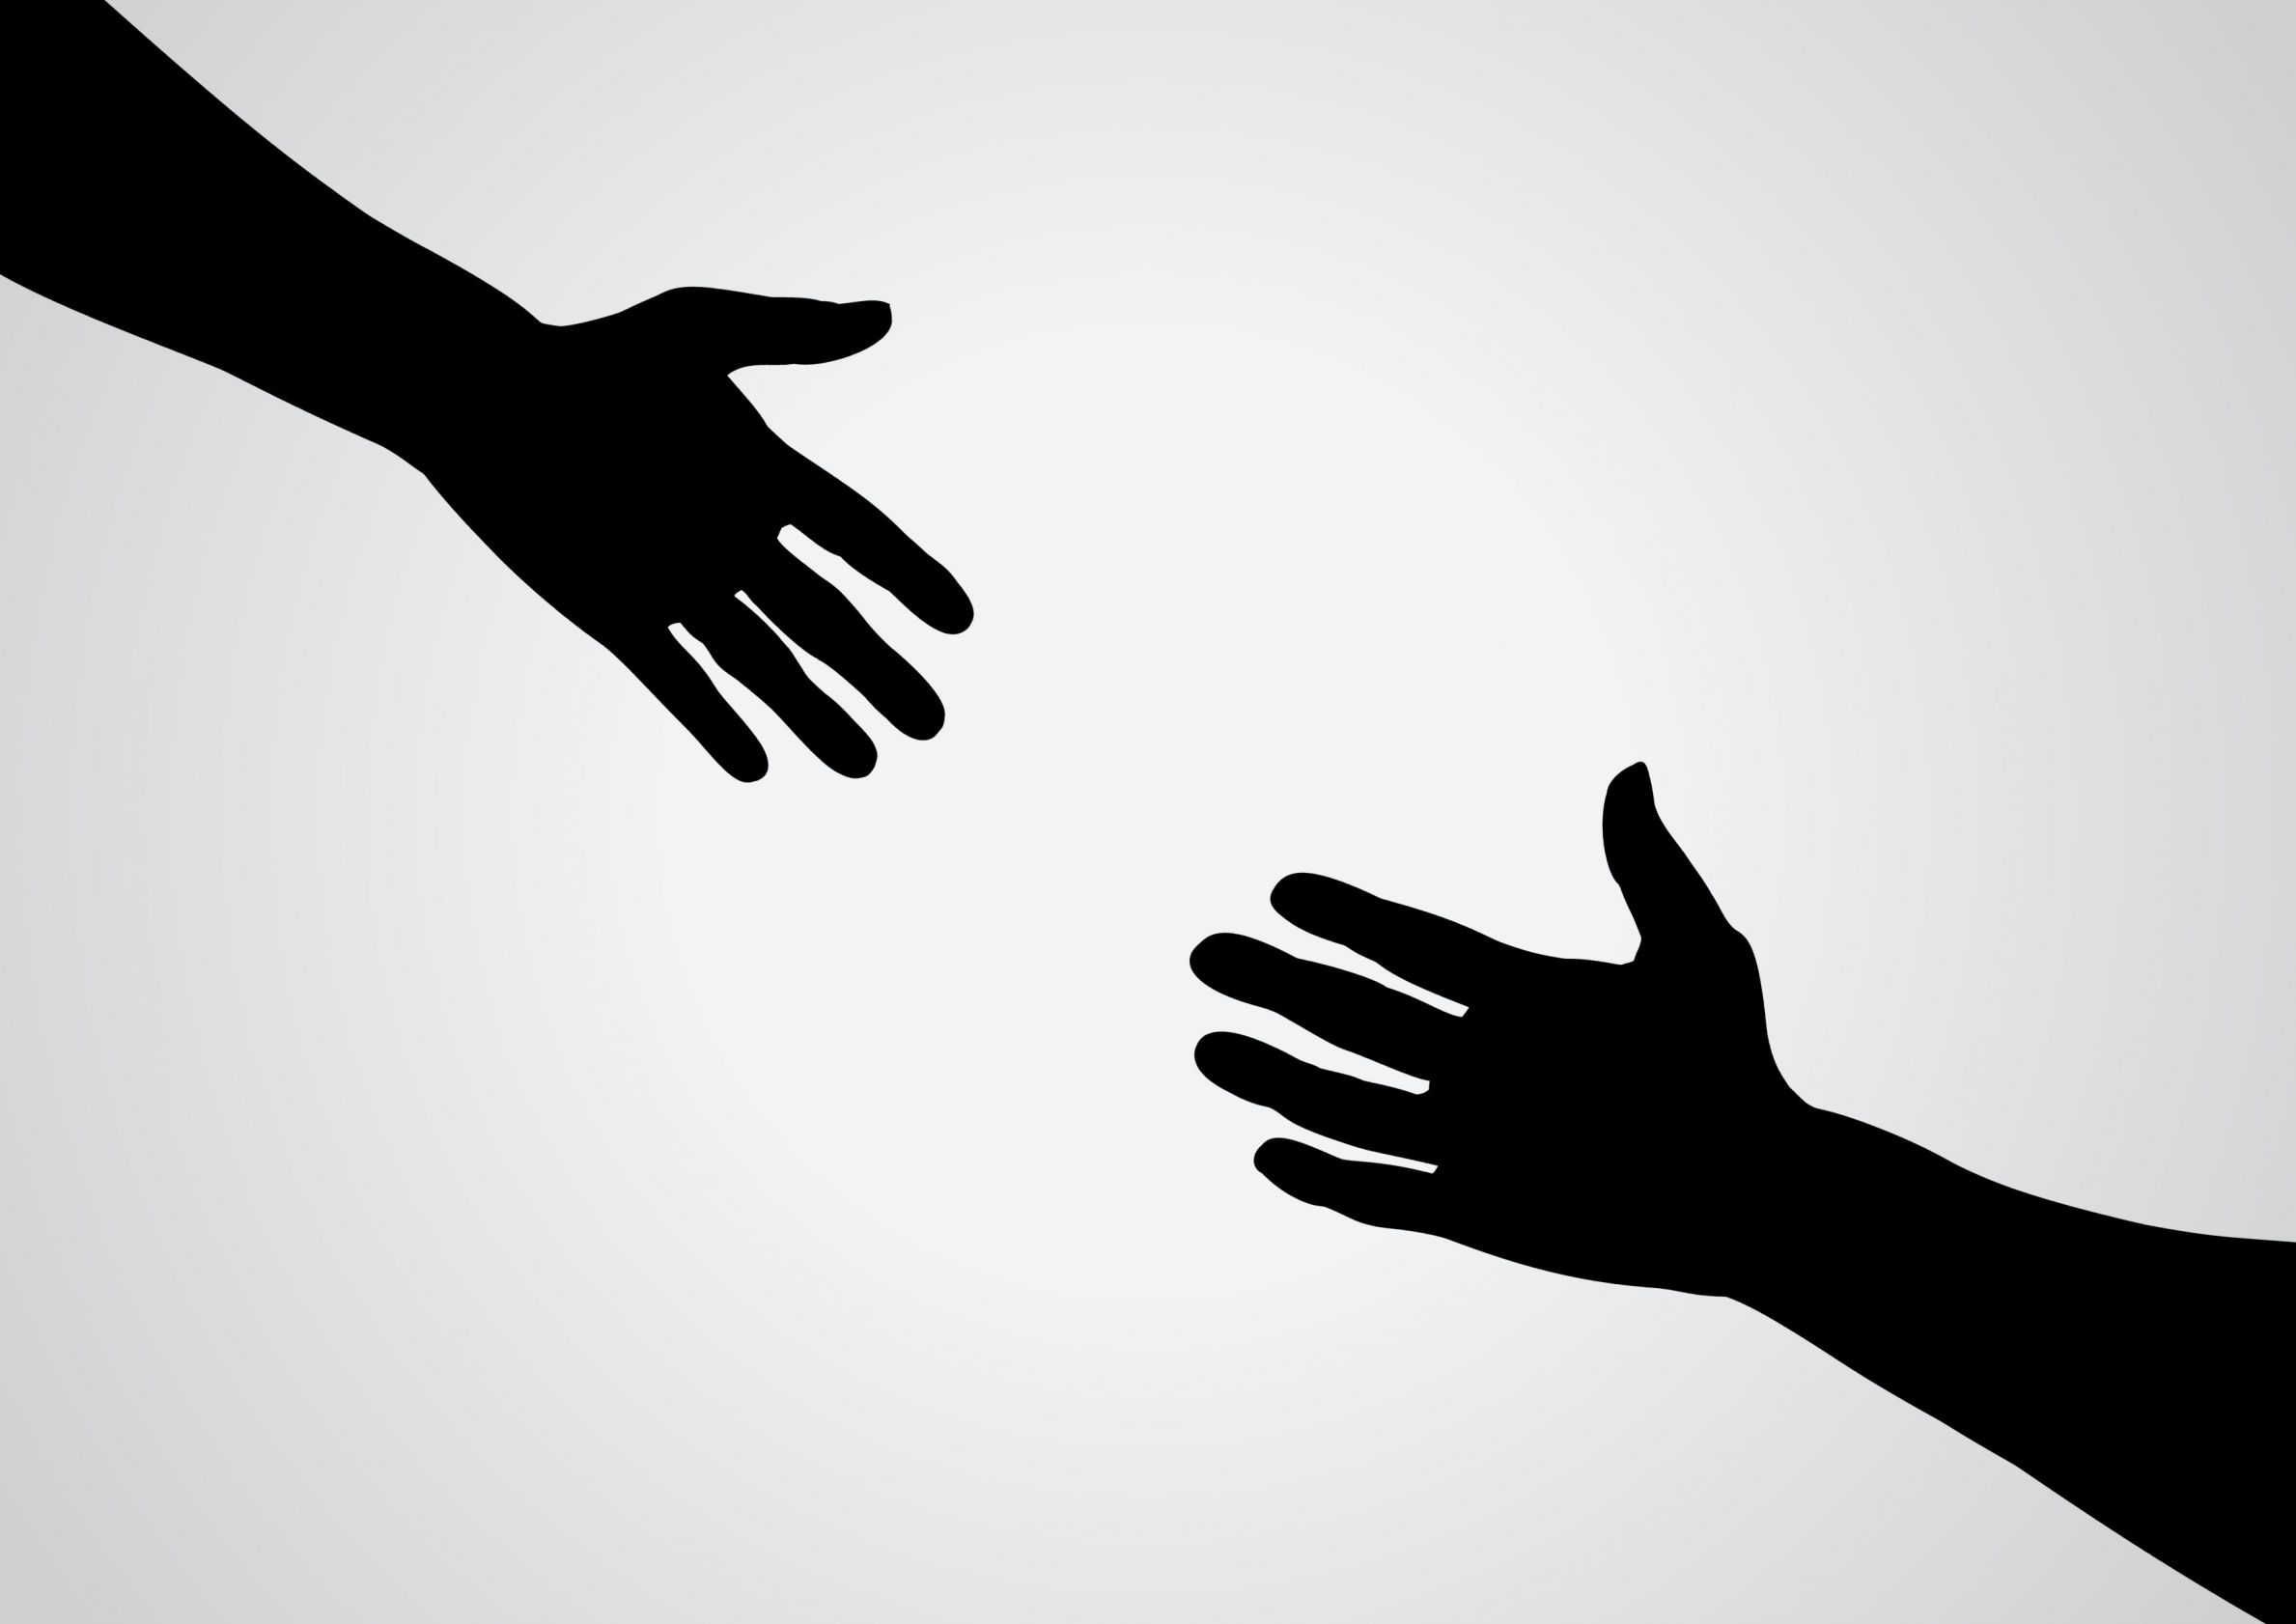 Lend a Helping Hand – Perspective